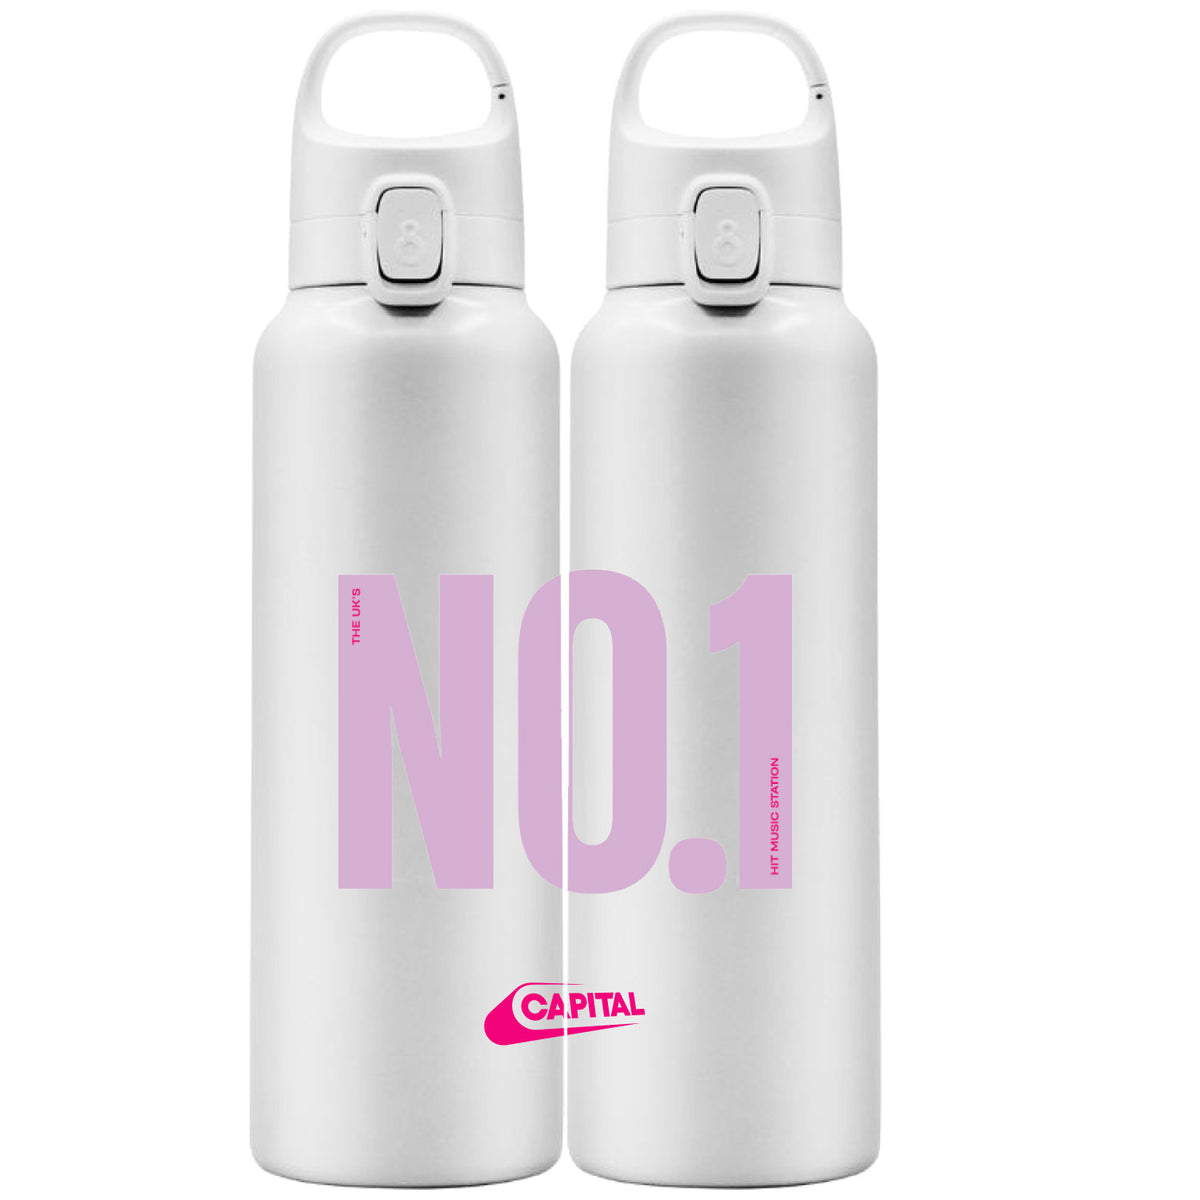 Capital No.1 Pink White Water Bottle